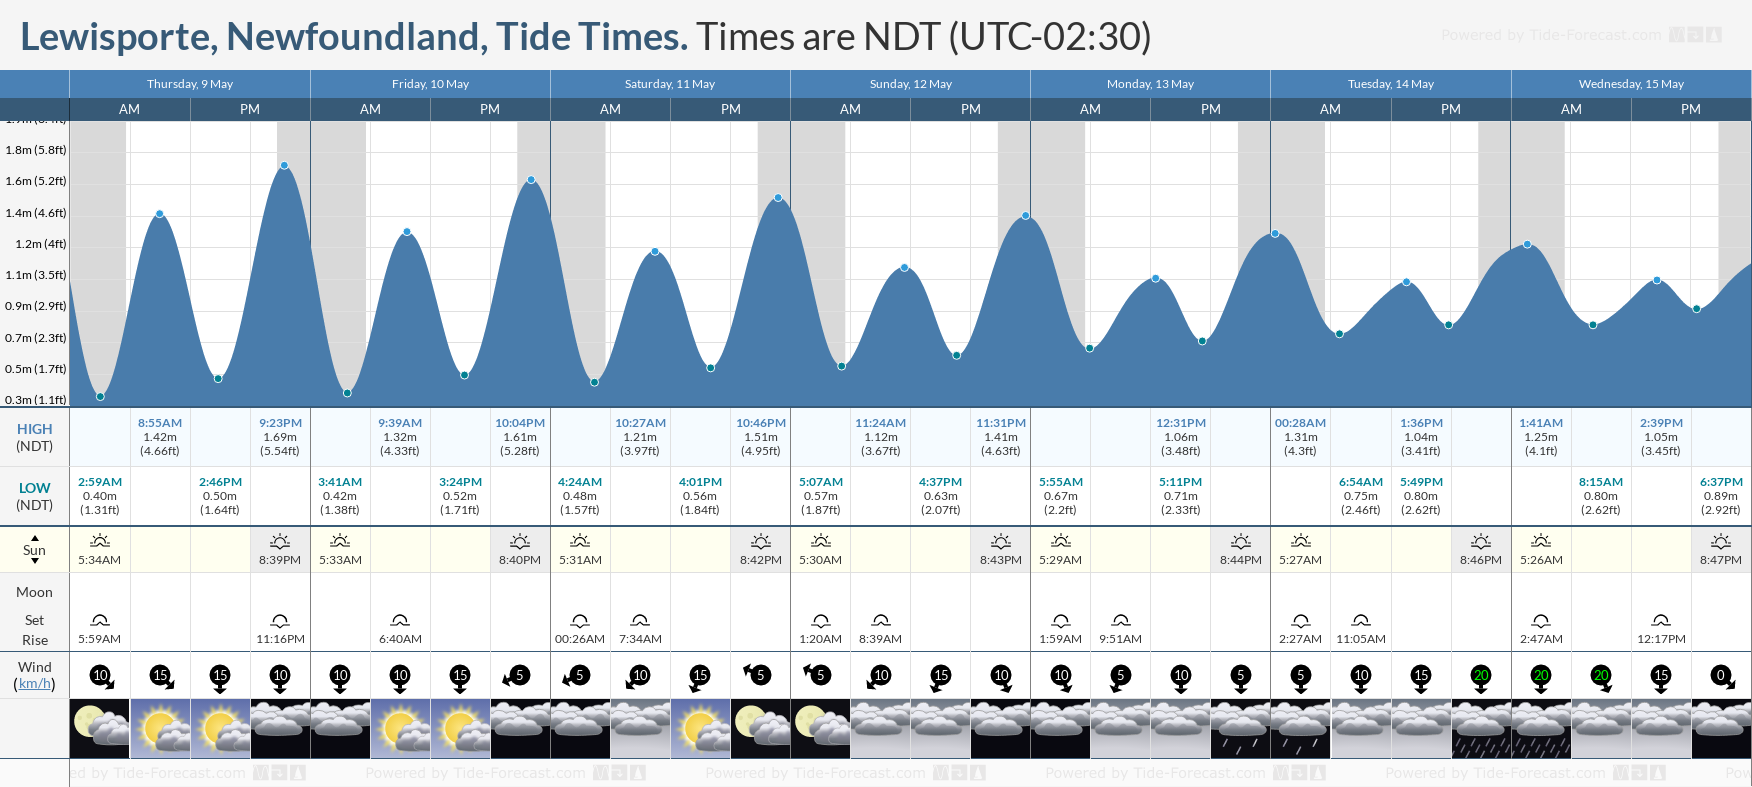 Lewisporte, Newfoundland Tide Chart including high and low tide tide times for the next 7 days